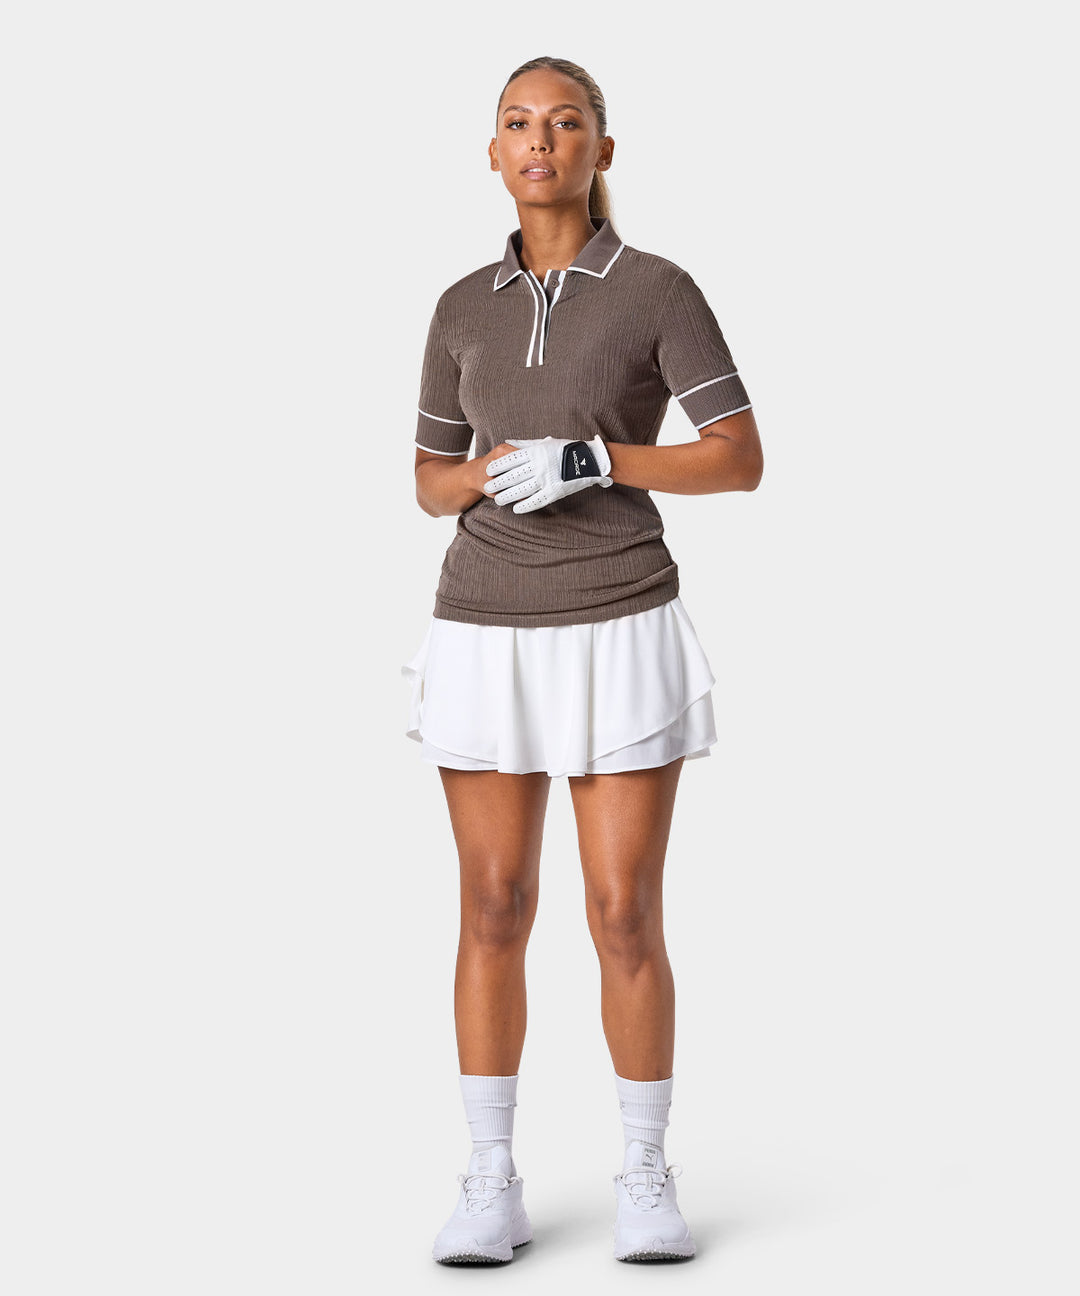 Lucy Taupe Polo Shirt Macade Golf